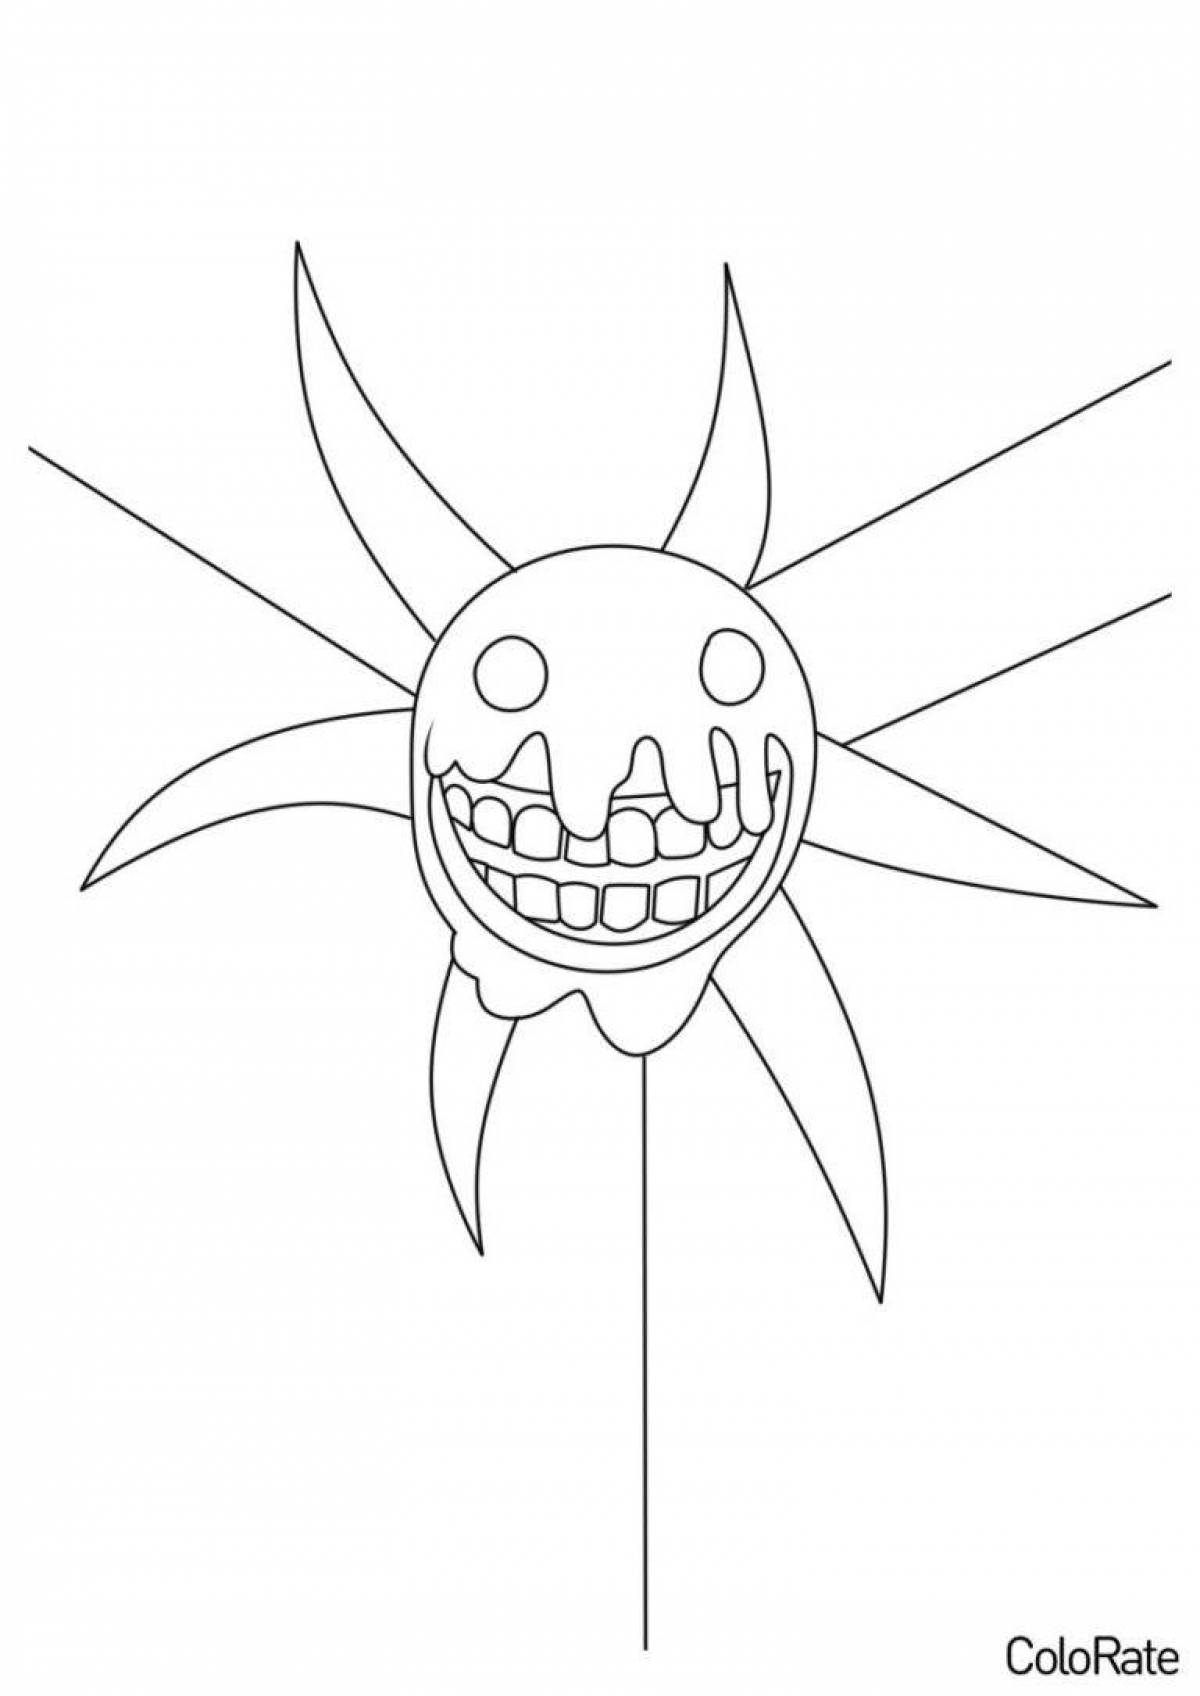 Exciting roblox door coloring page